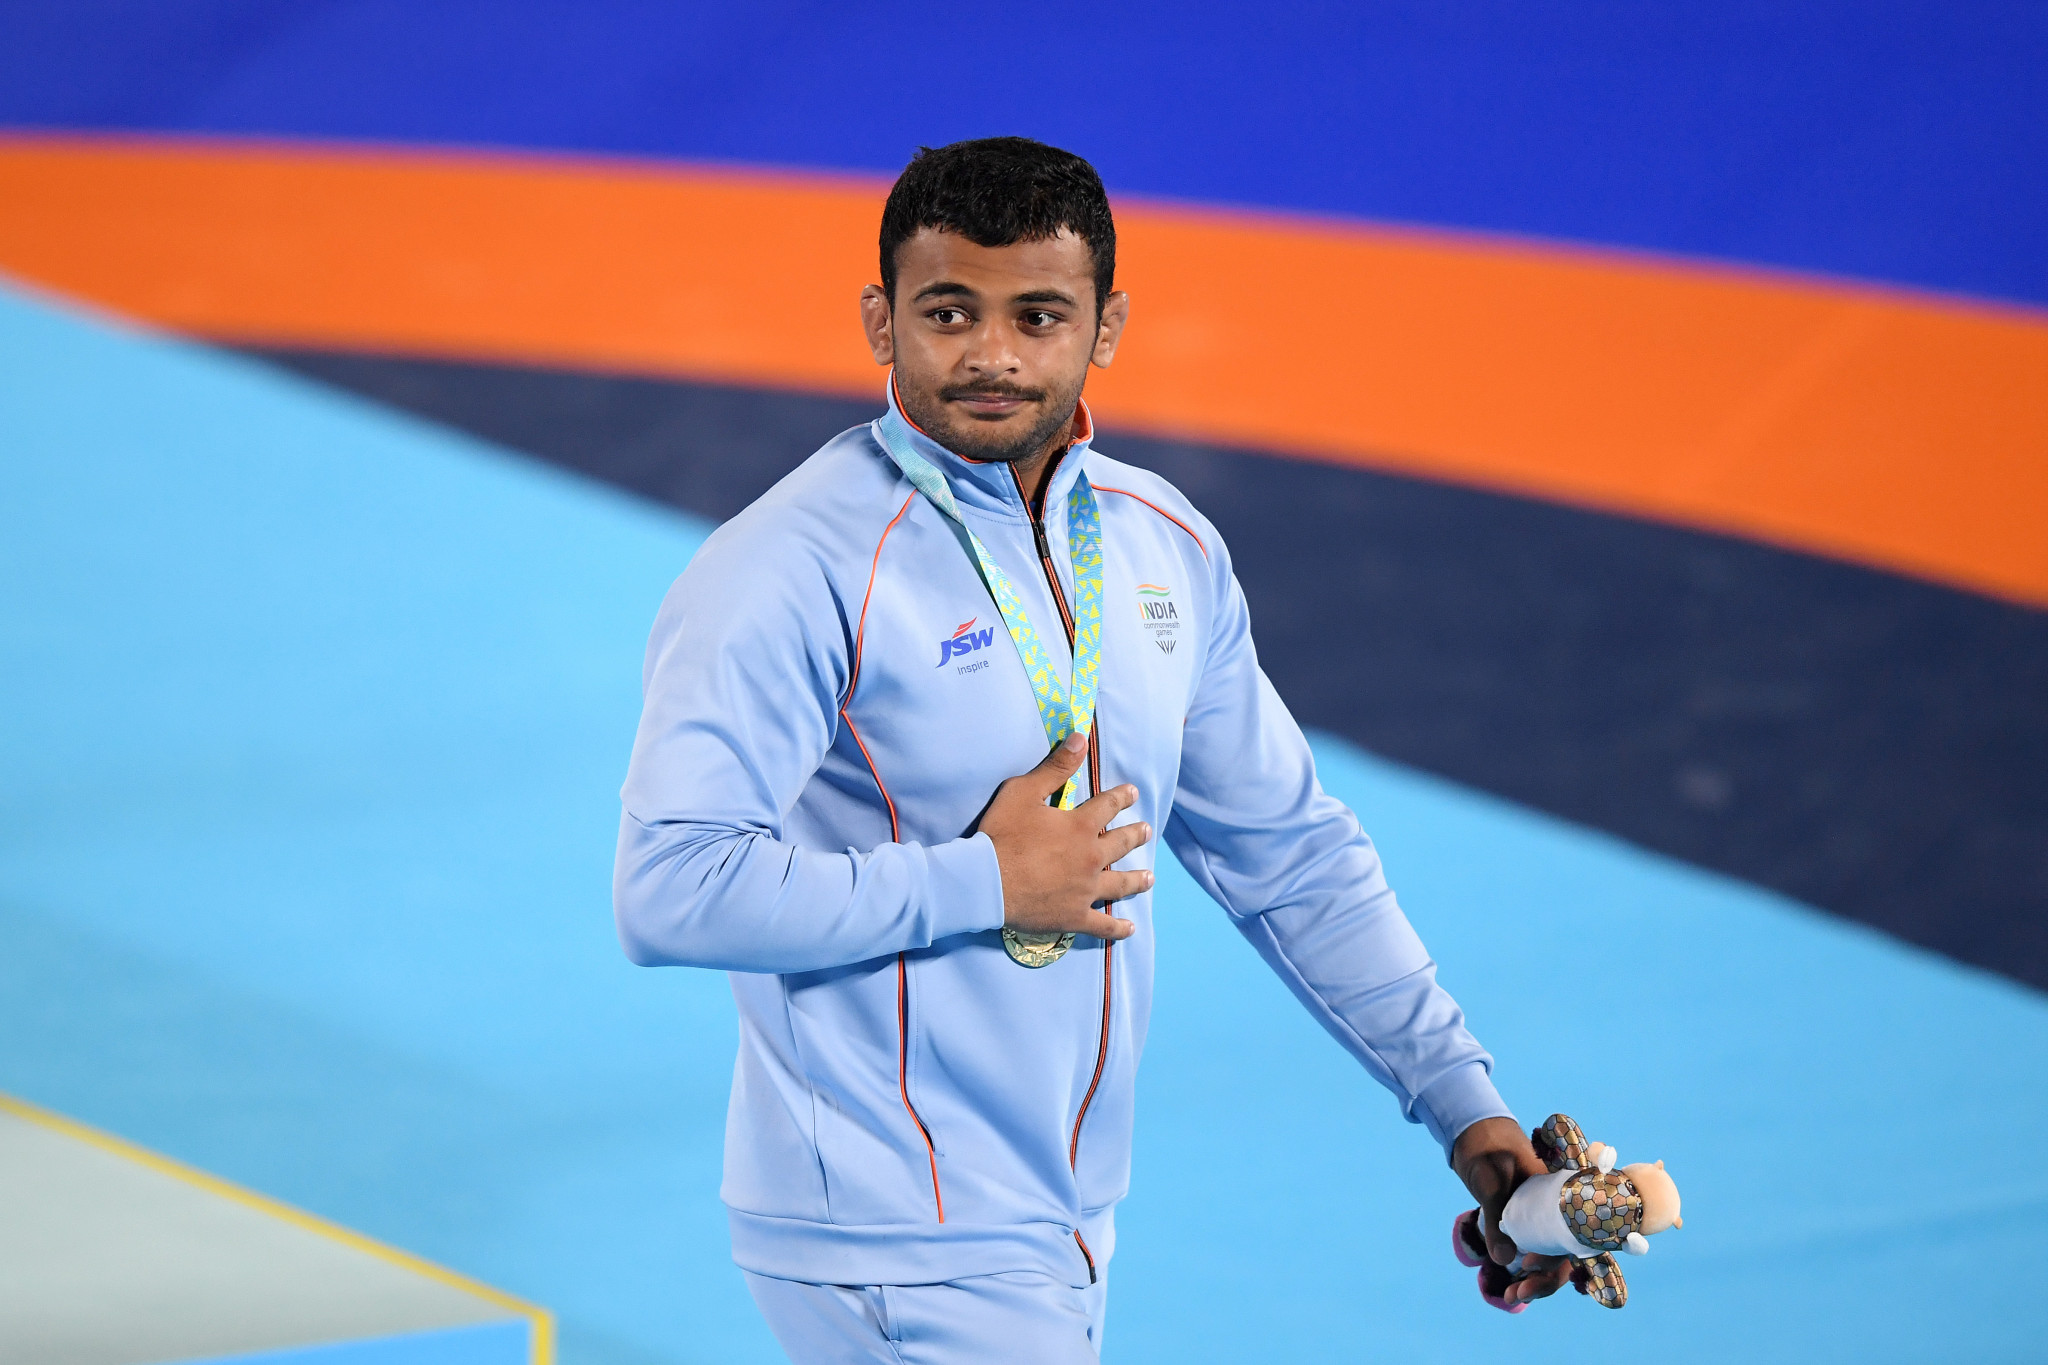 Deepak Punia delighted the large number of Indian fans at Coventry Arena with another gold medal ©Getty Images